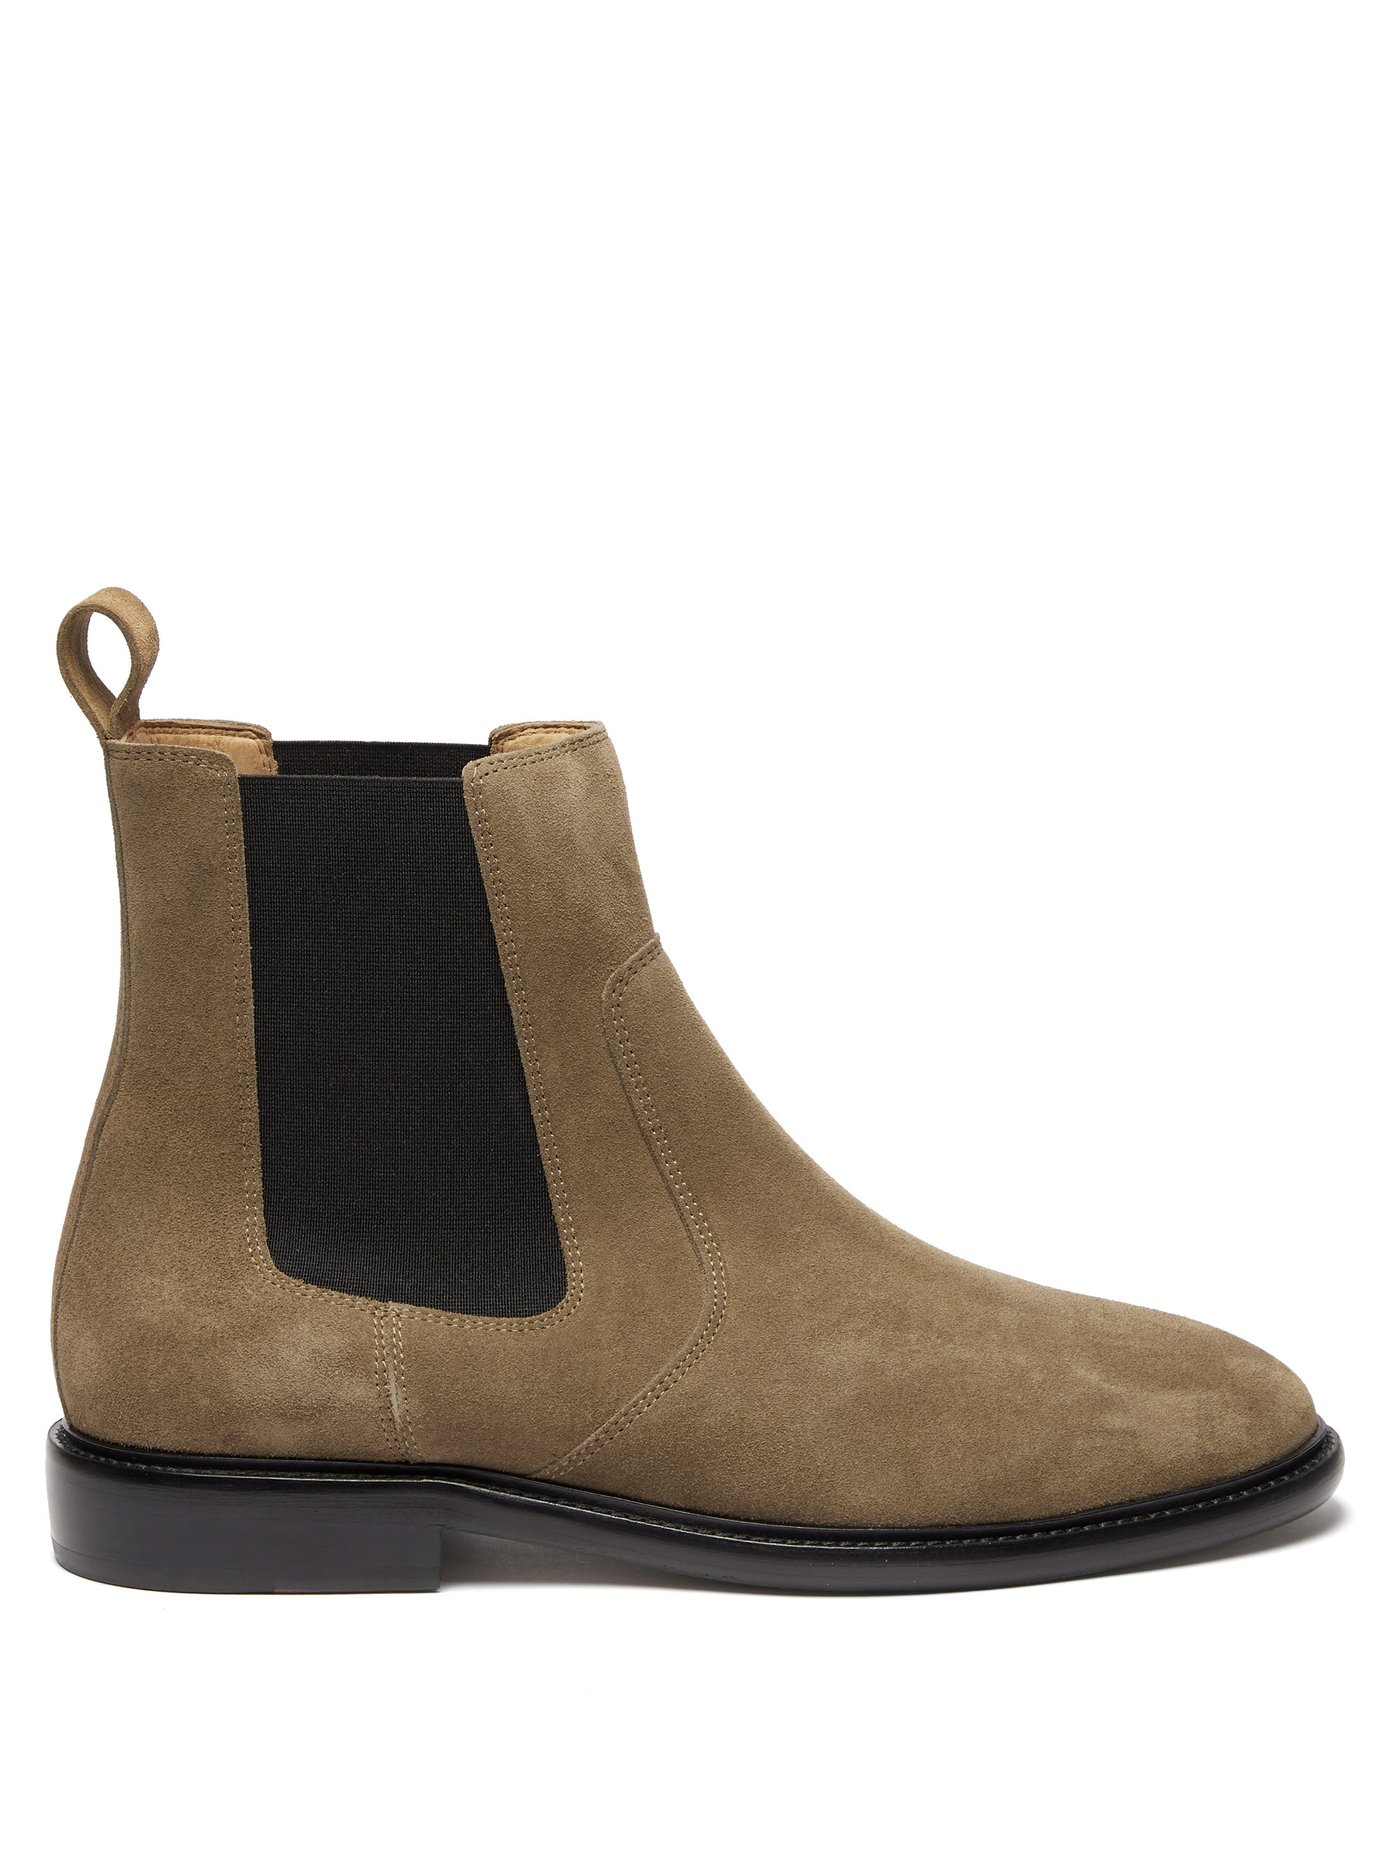 Chelt suede Chelsea boots | Isabel 